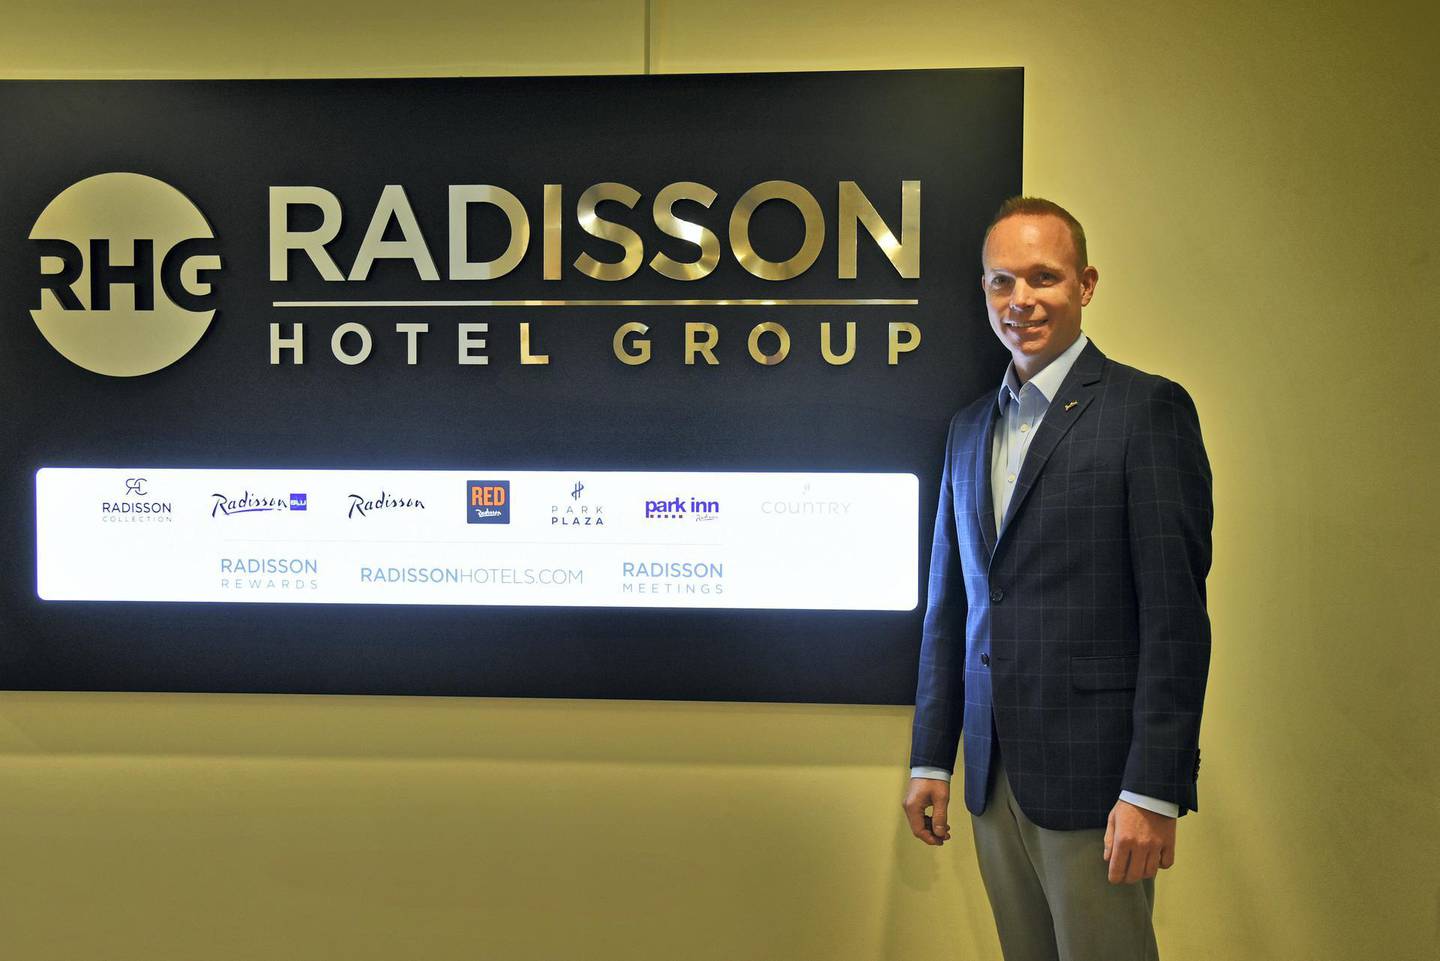 Tim Cordon, area senior vice president of Radisson Hotel Group for Middle East & Africa poses for a photograph in front of the Radisson Hotel Group logo at his office in Dubai, UAE, Monday, July 1, 2019. (Photos by Shruti Jain/The National)